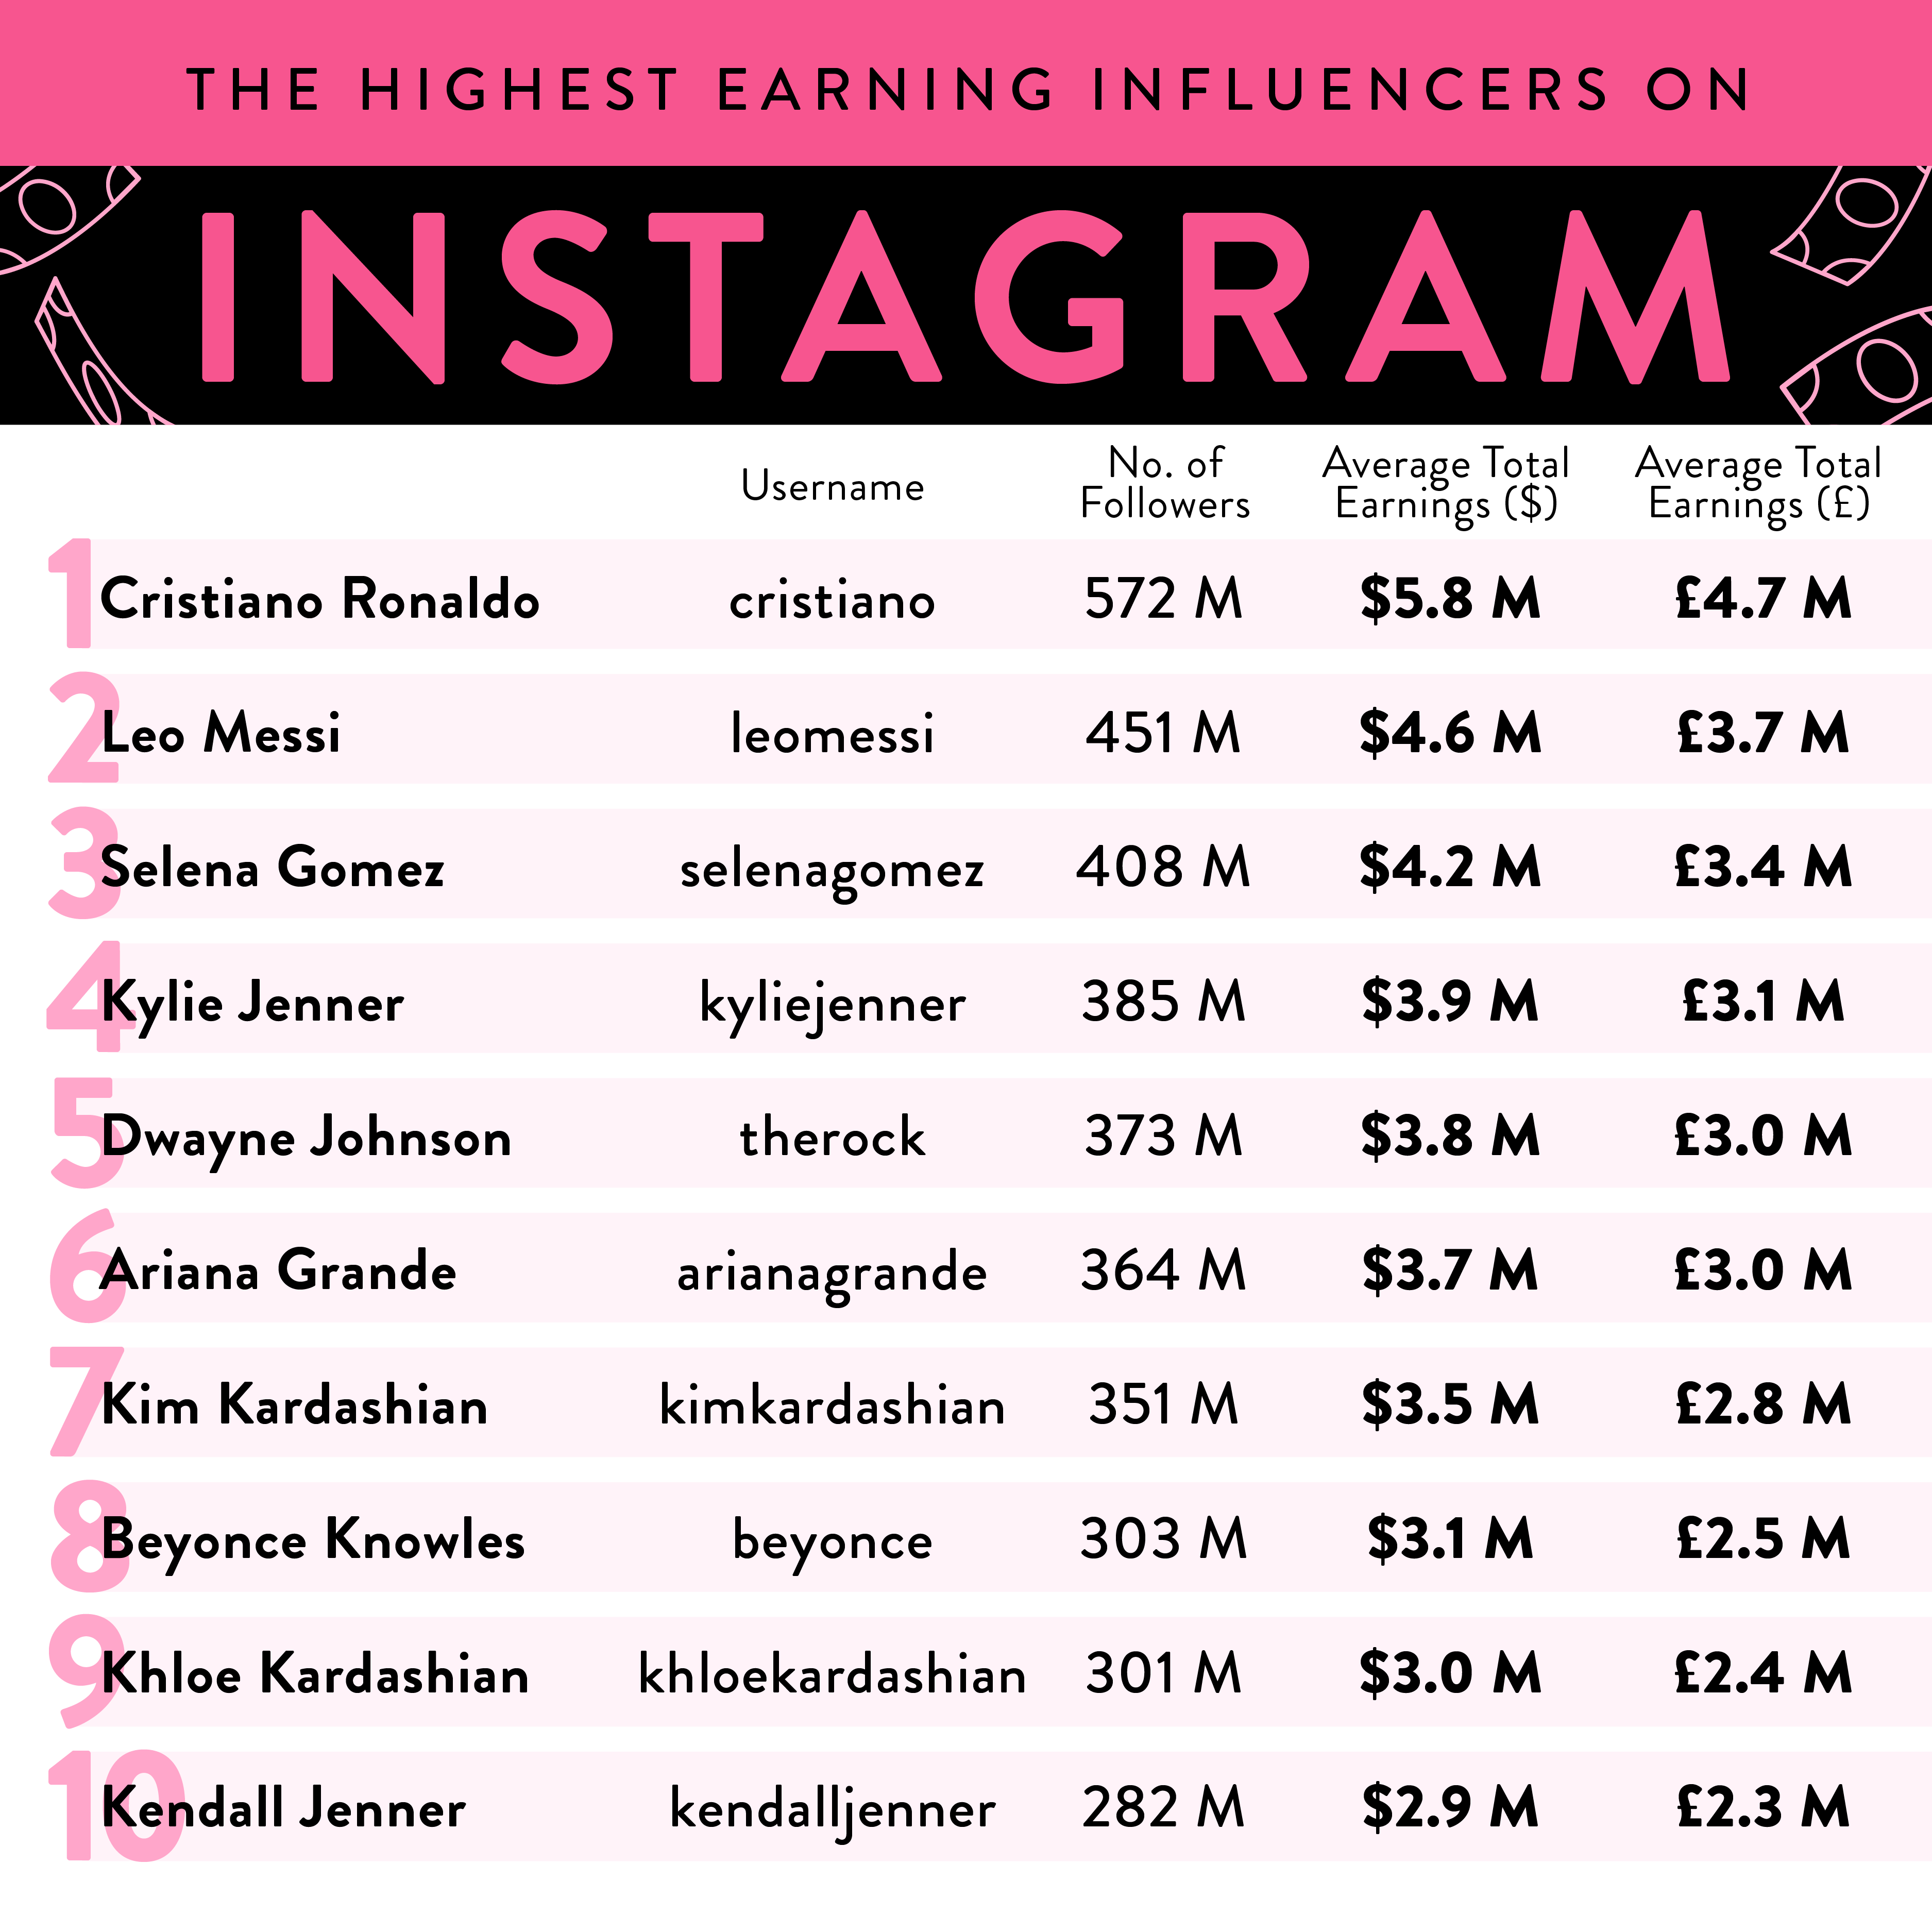 List of the highest earners on Instagram